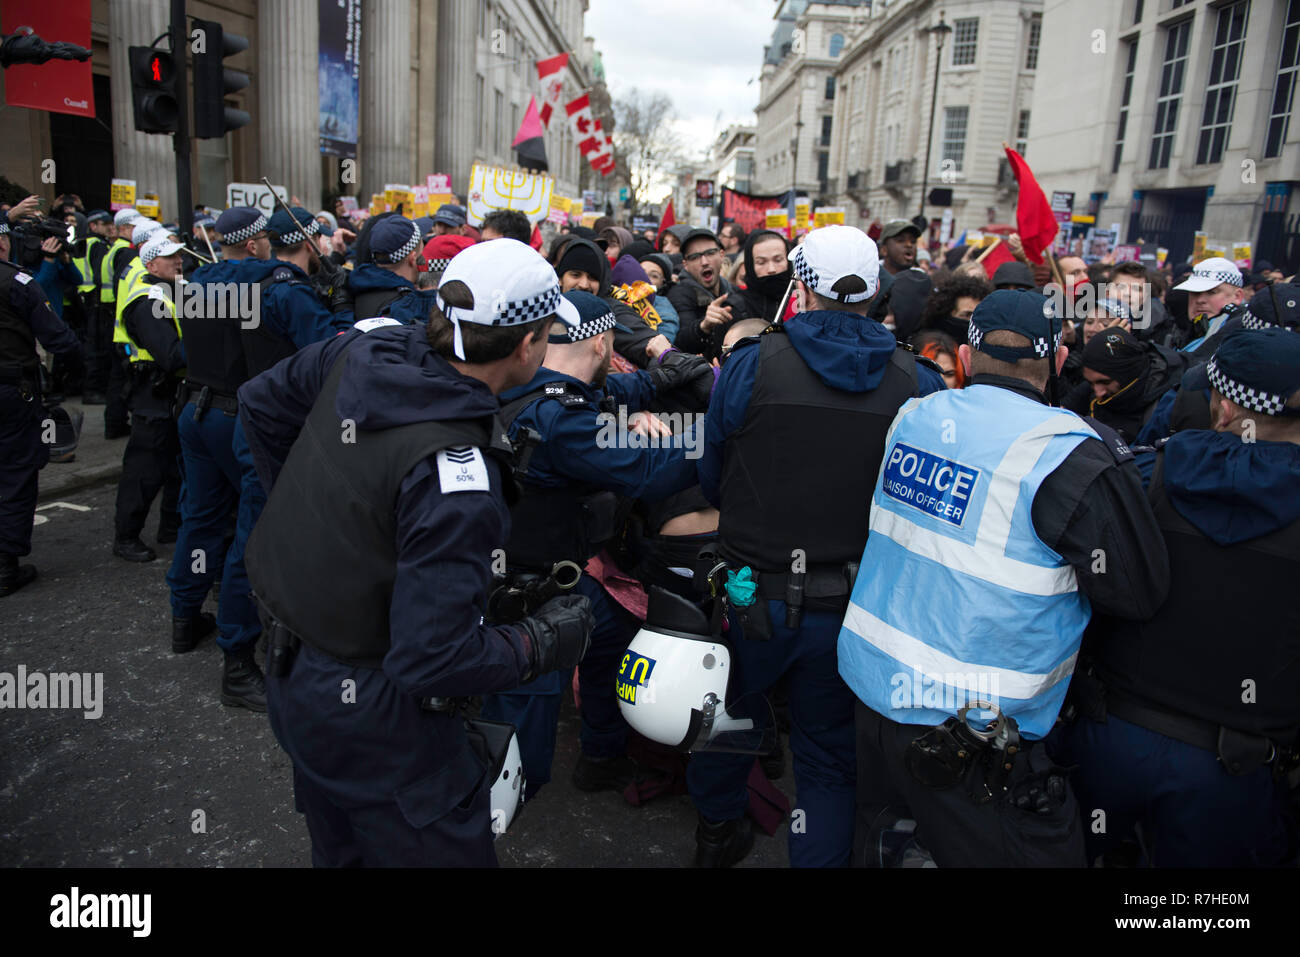 Police officers contain a group of protesters marching to Whitehall during the demonstration against the 'Brexit Betrayal March'.  Thousands of people took to the streets in central London to march against the 'Brexit Betrayal March' organised by Tommy Robinson and UKIP. Counter Protesters made their way from Portland Place to Whitehall, where speakers addressed the crowd. During the counter demonstration, there was a strong police presence. A group of counter protesters, who became separated from the main protest, were corralled by police to avoid an encounter with a group of Tommy Robinson / Stock Photo